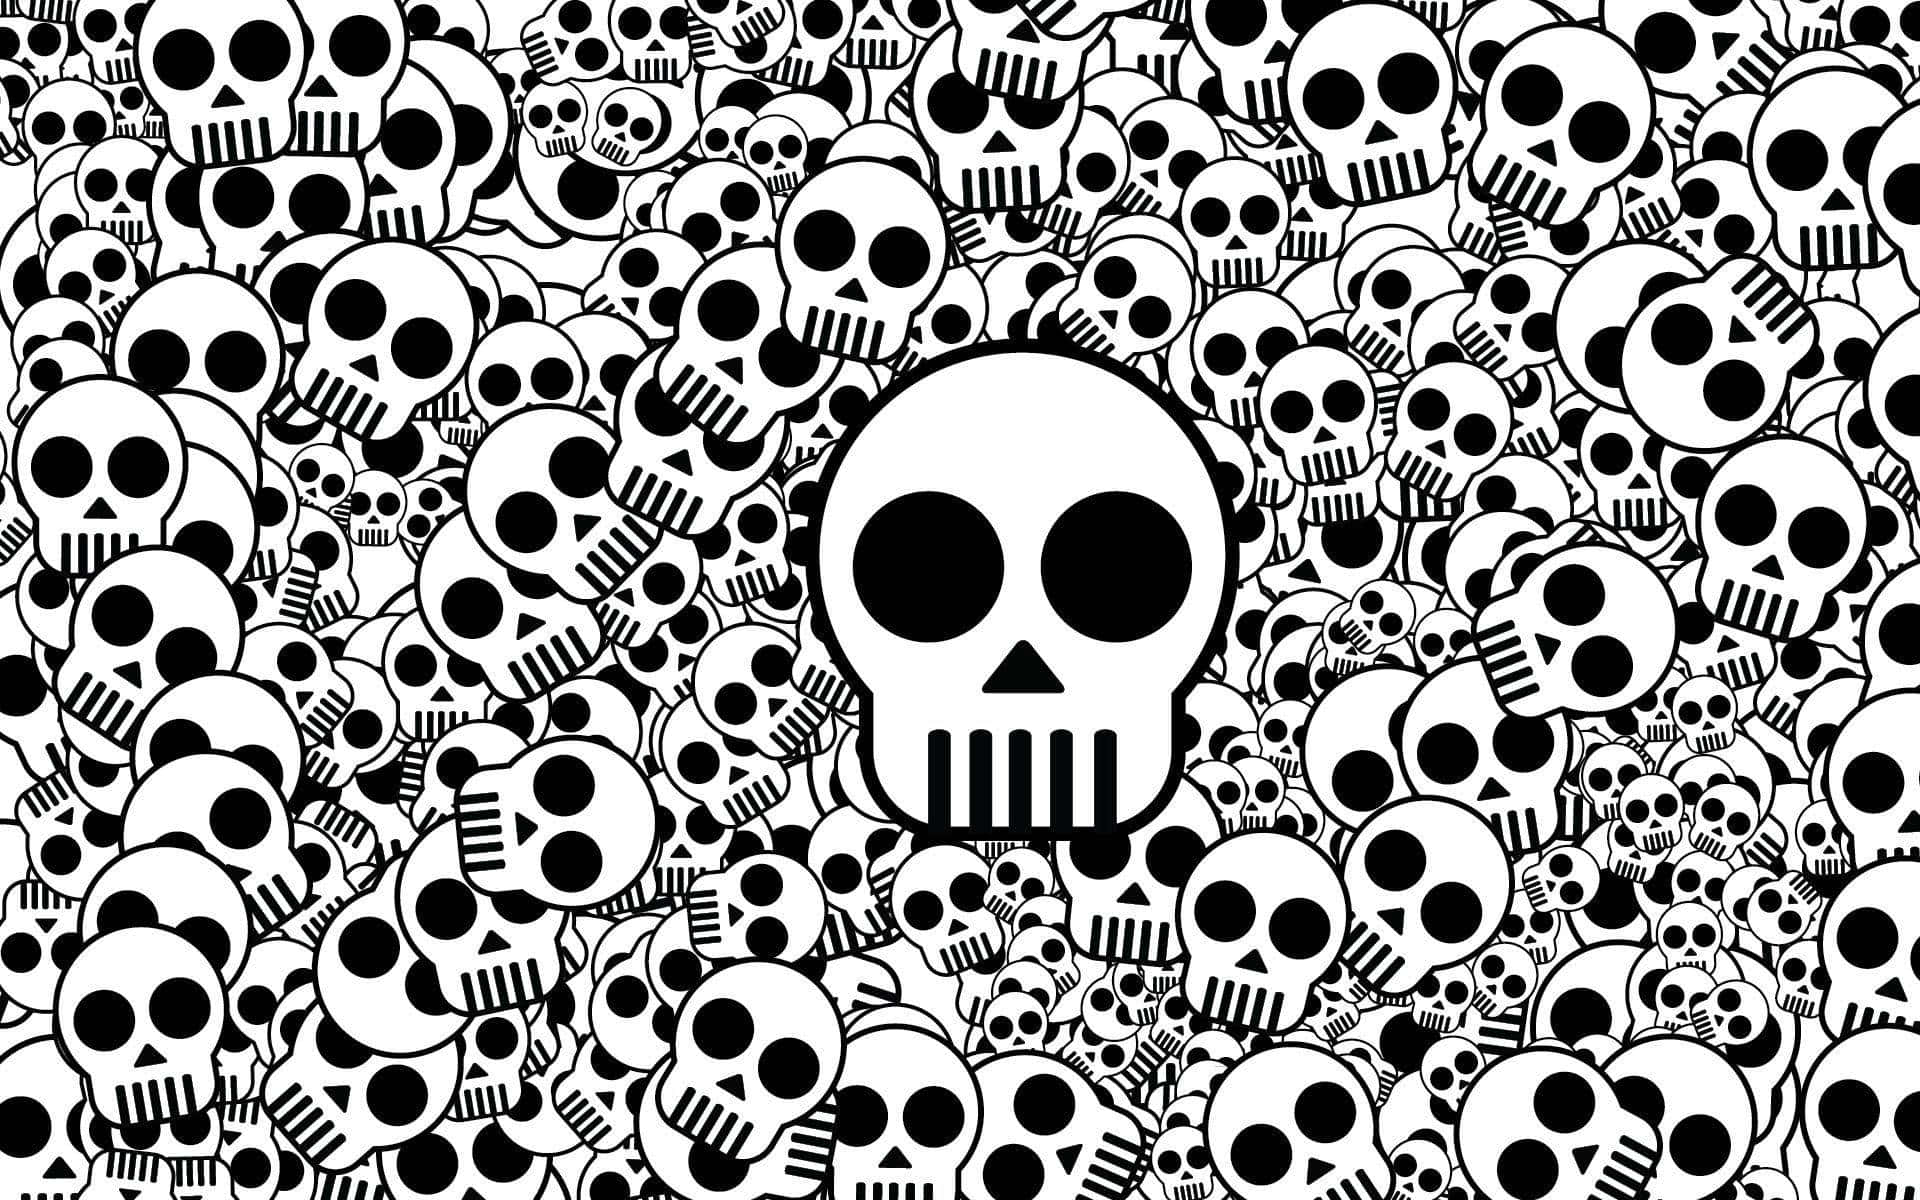 "The Skull of Awesome" Wallpaper